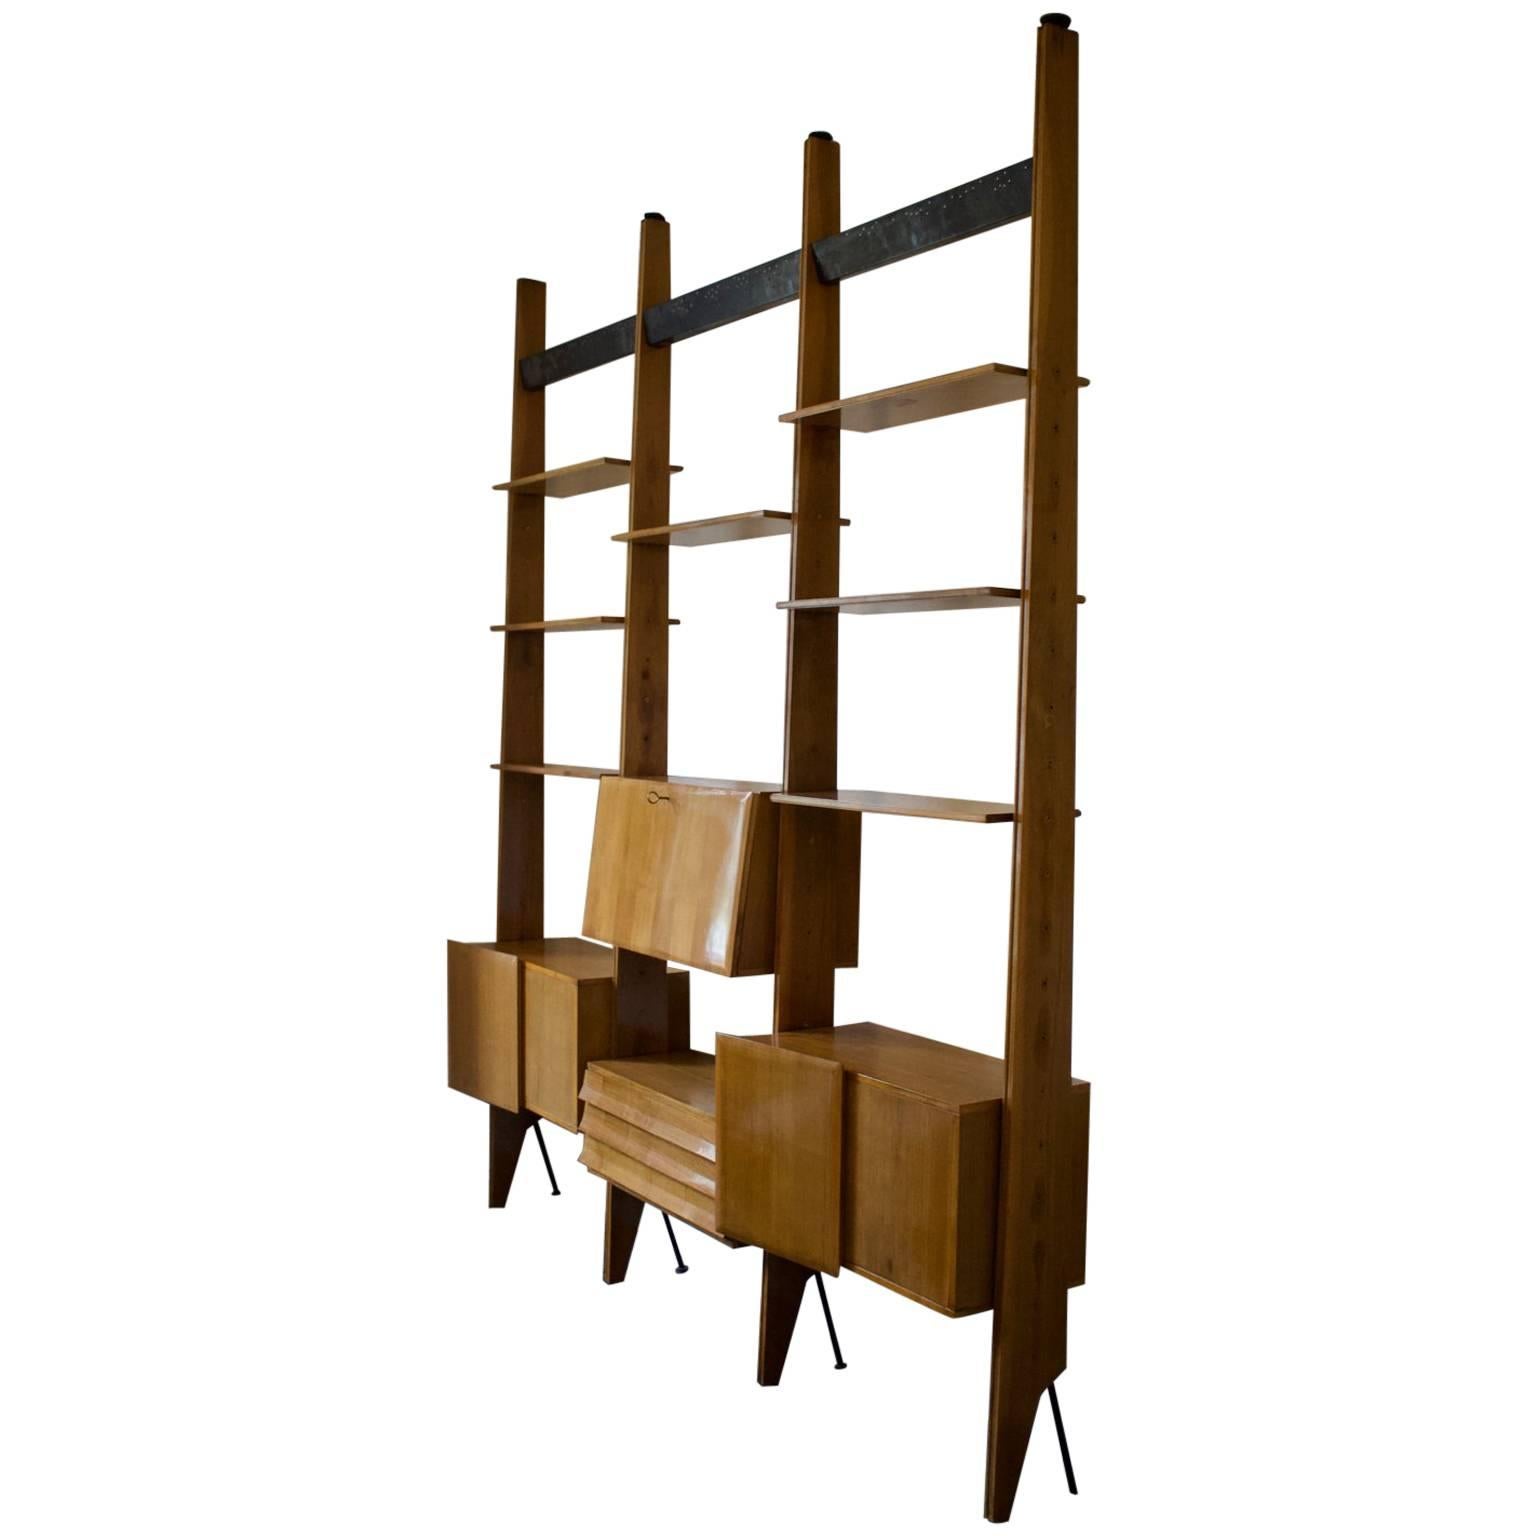 Shelving System or Room Divider attributed to Dassi, Italy 1950s